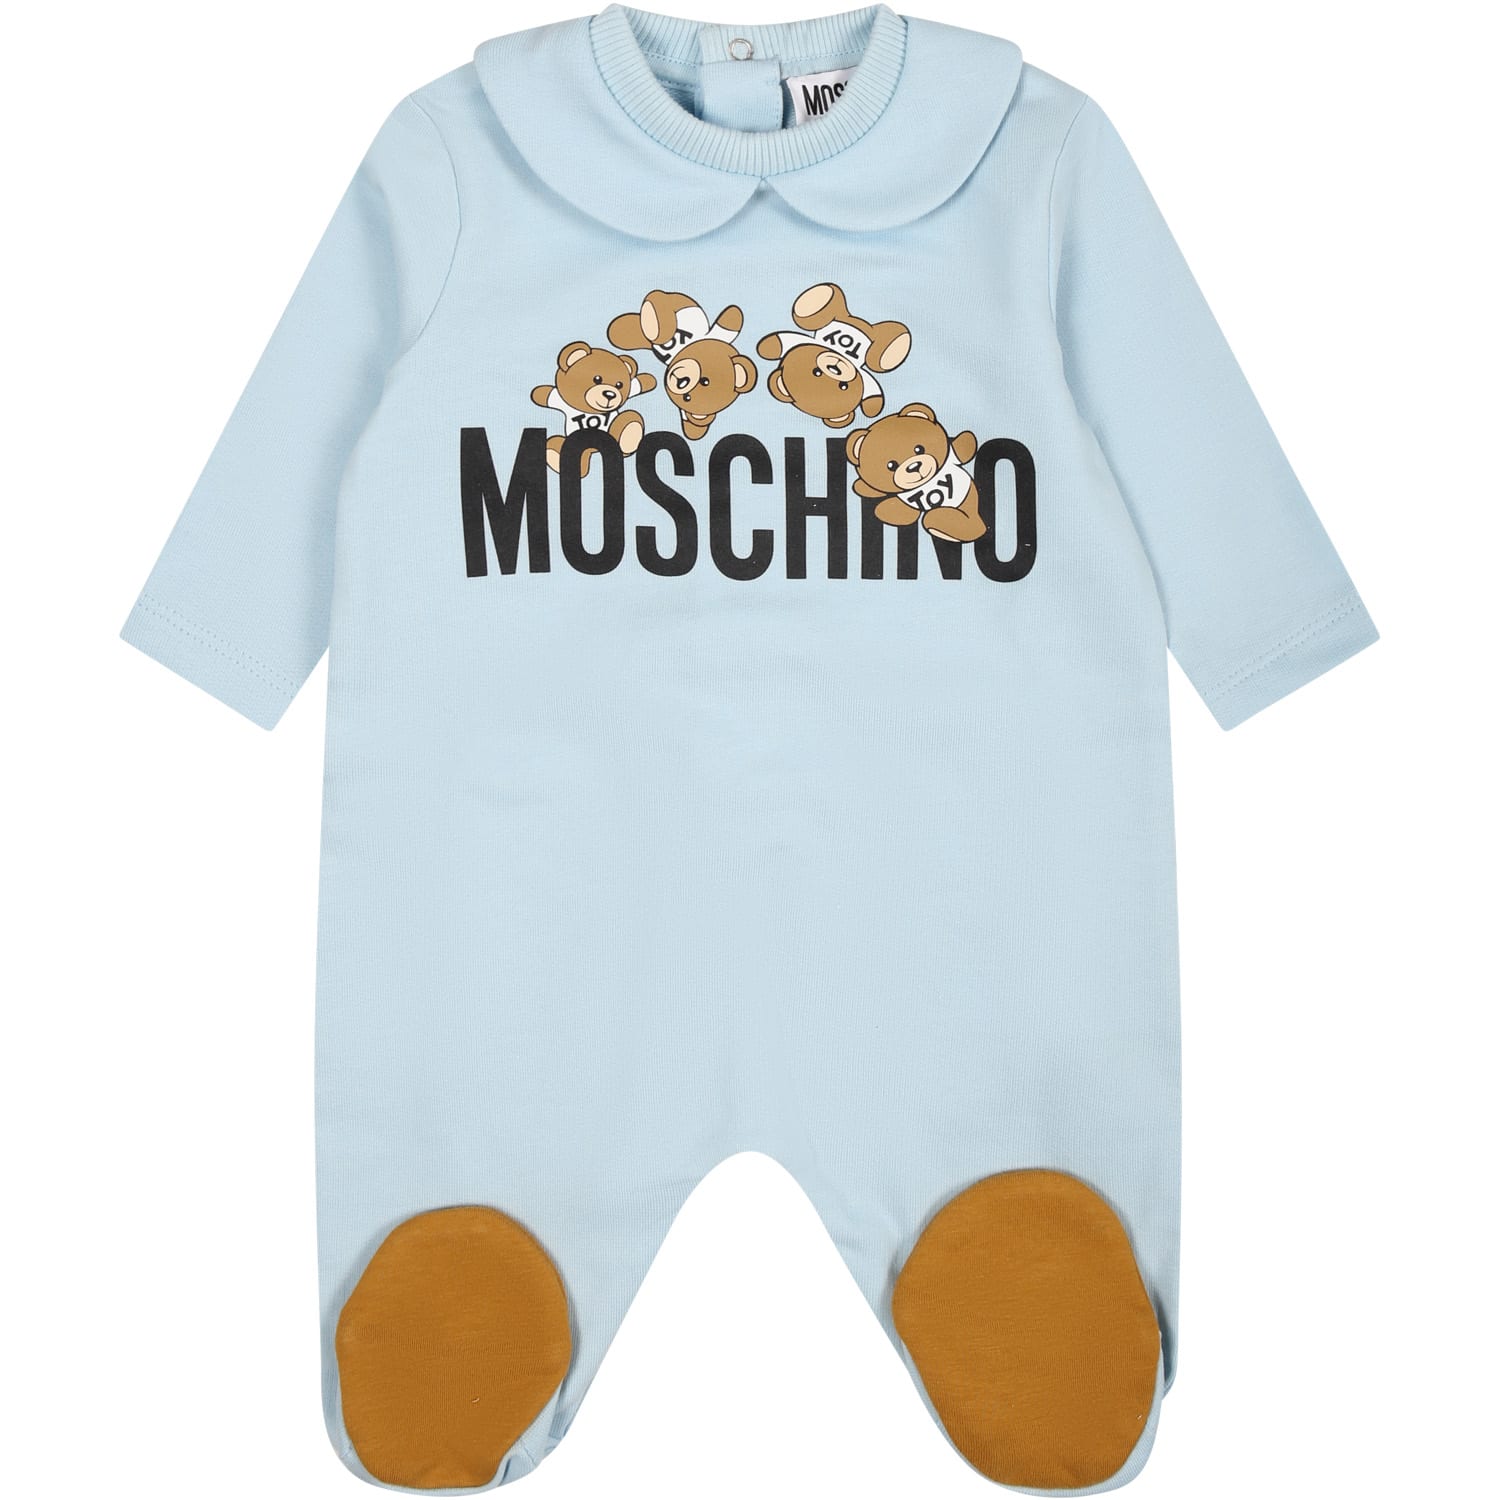 Moschino Light Blue Playsuit For Baby Boy With Logo And Teddy Bear